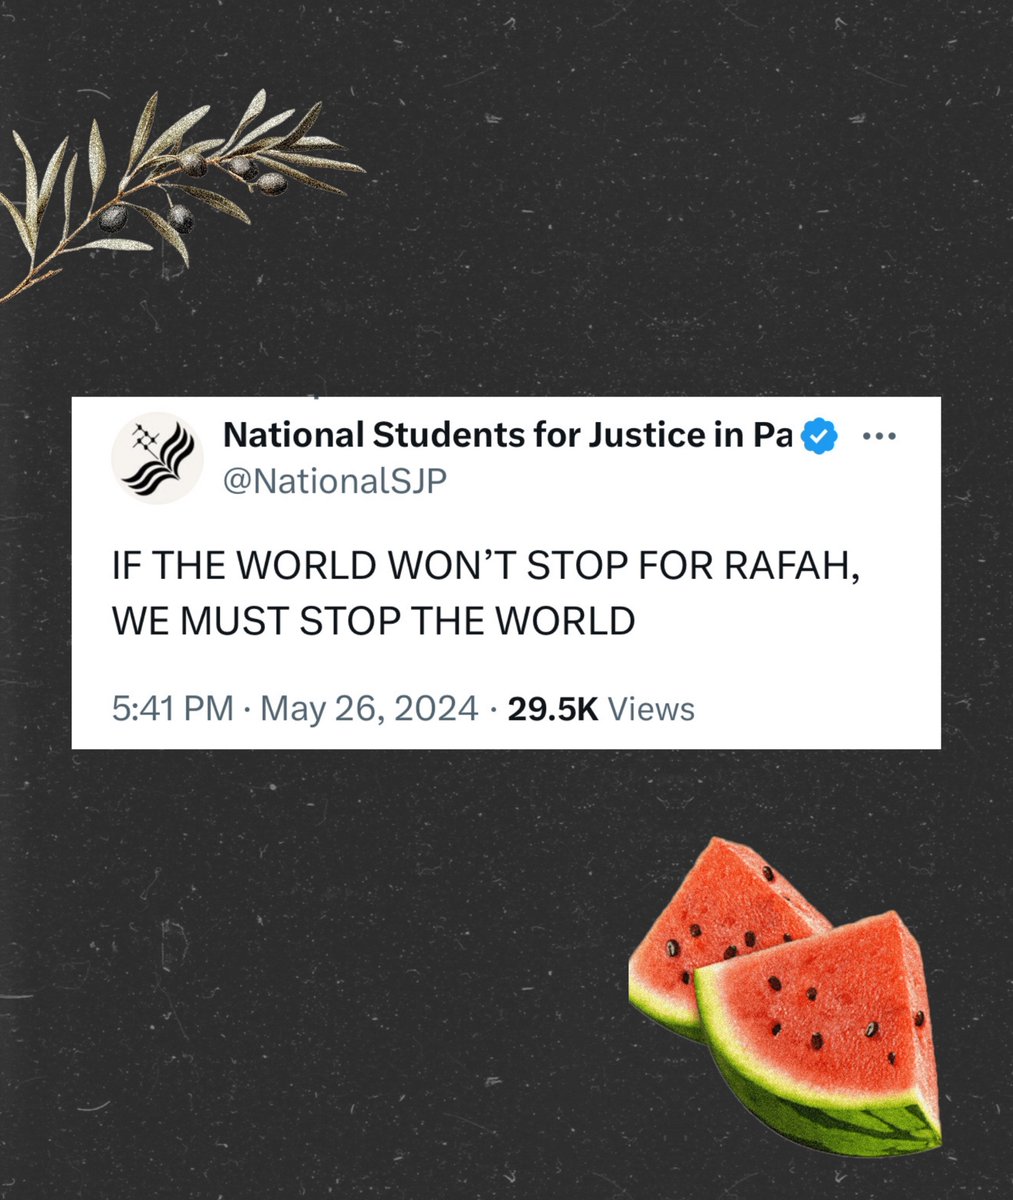 @NationalSJP: If the world won’t stop for Rafah, we must stop the world. Starting tomorrow, UCLA is on strike. Read on for our Day 1 schedule and key things to prepare for: